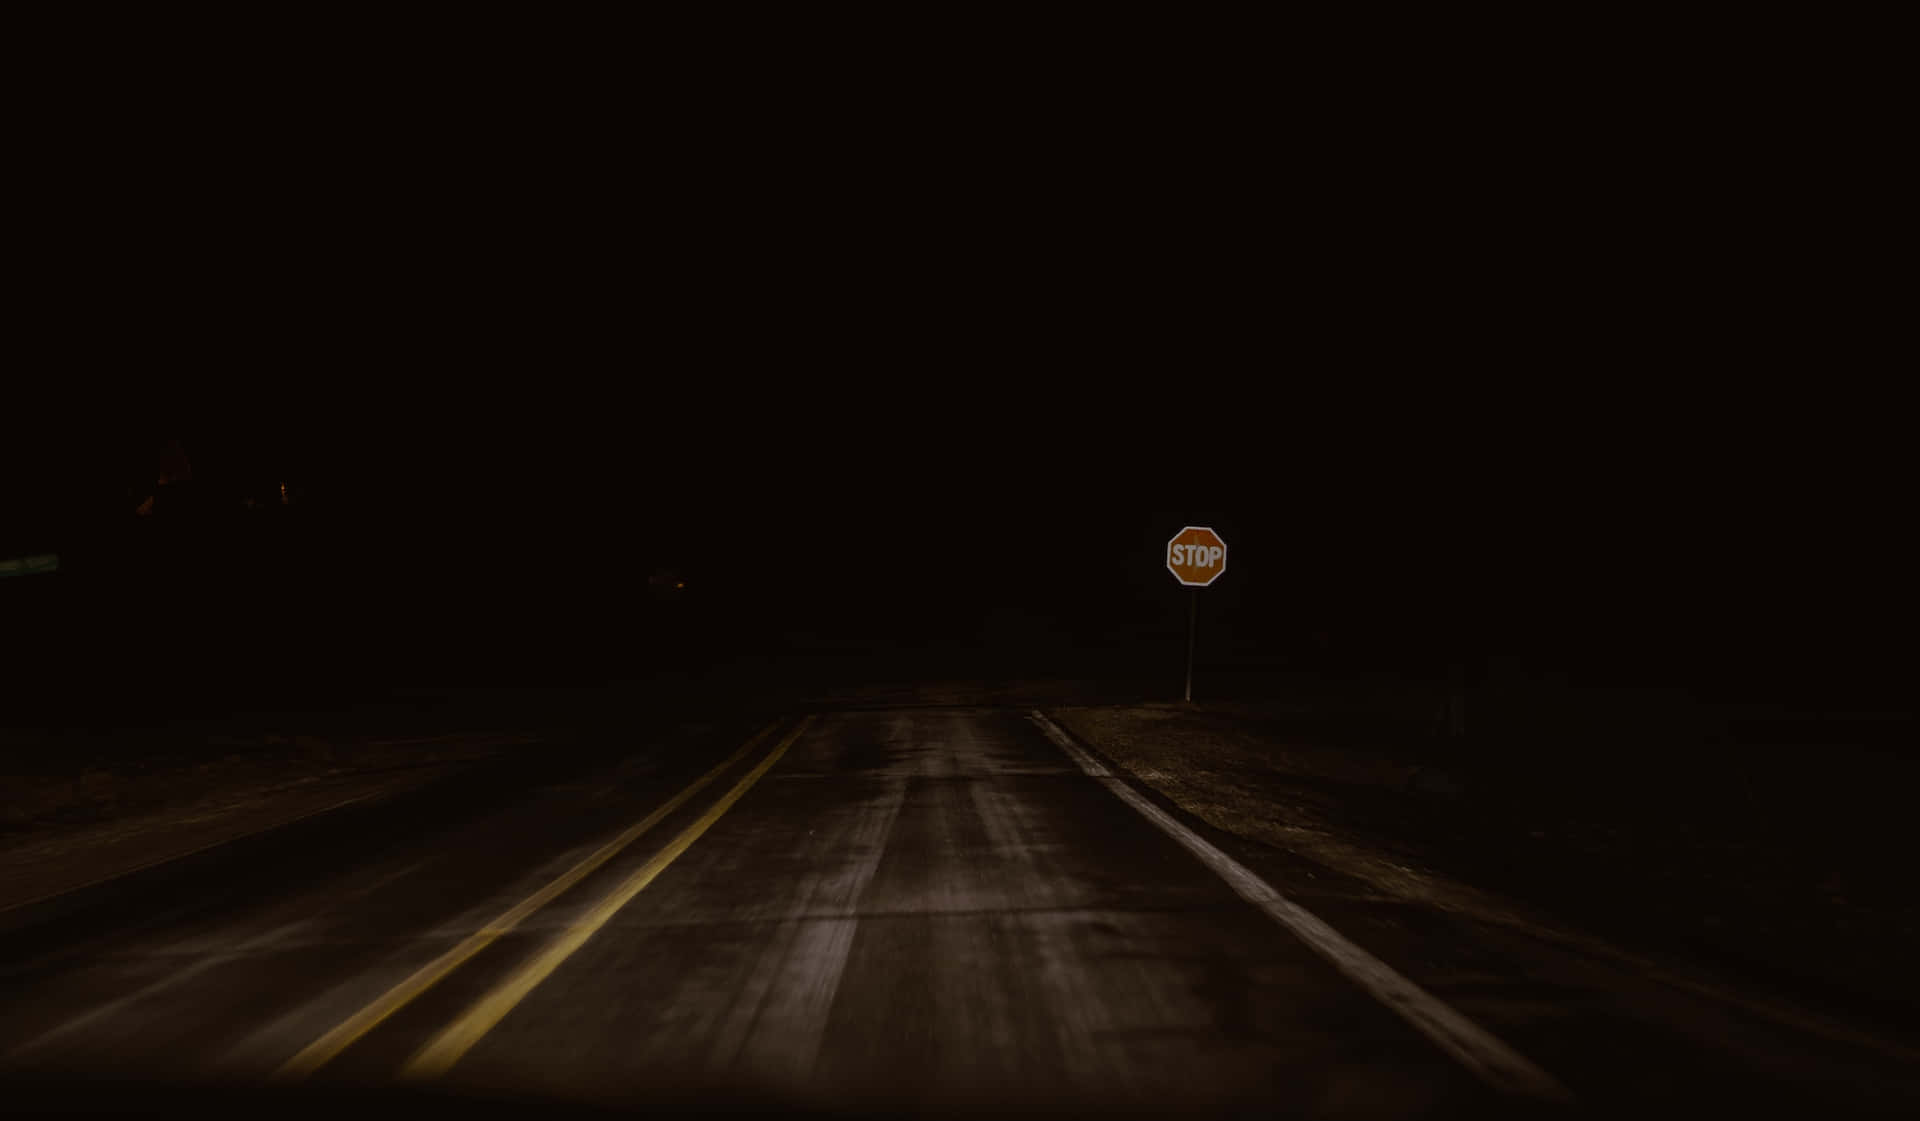 Mysterious Dark Road in the Night Wallpaper